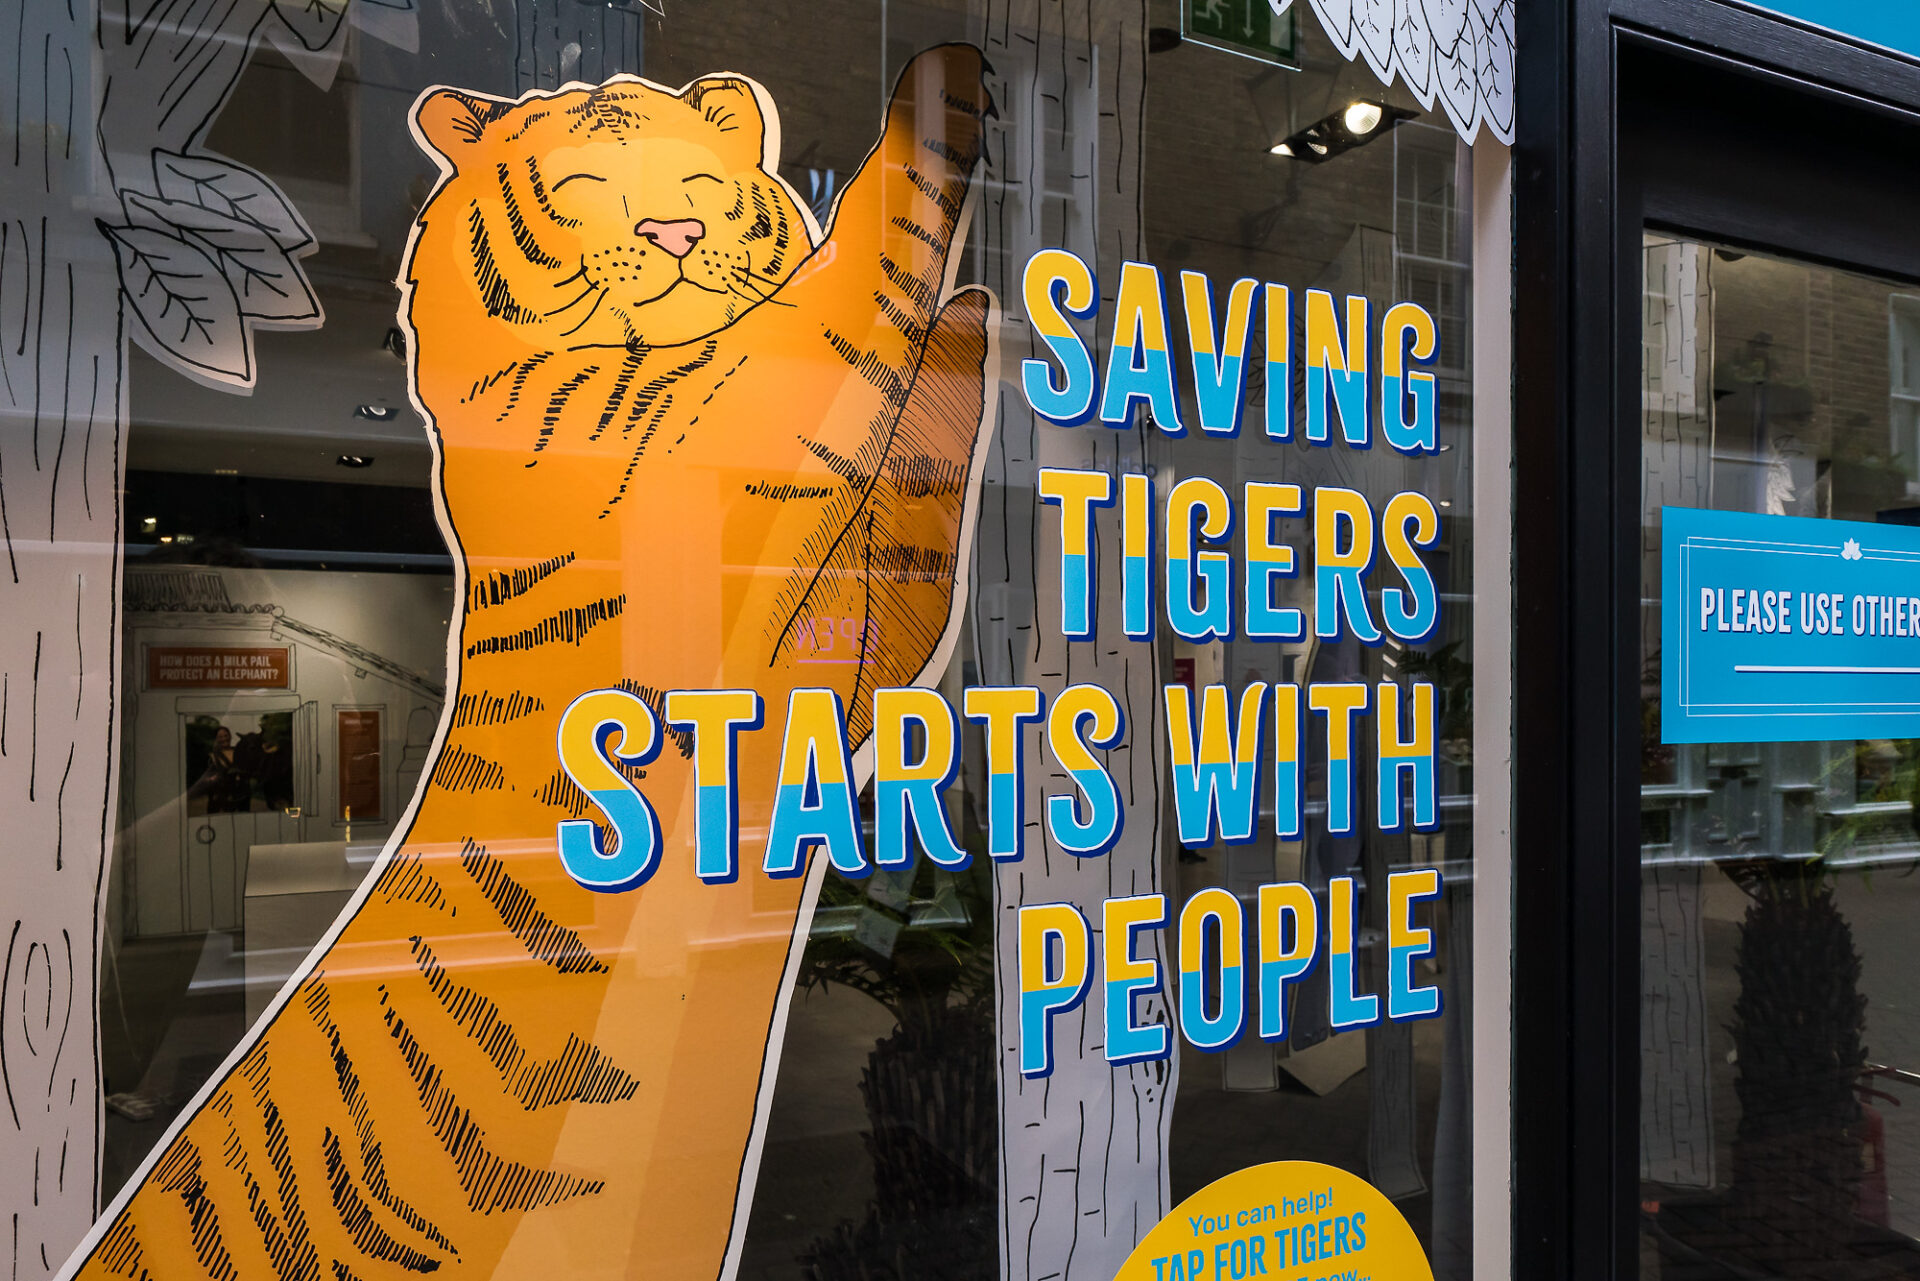 ZSL London Zoo window displays printed and installed in London